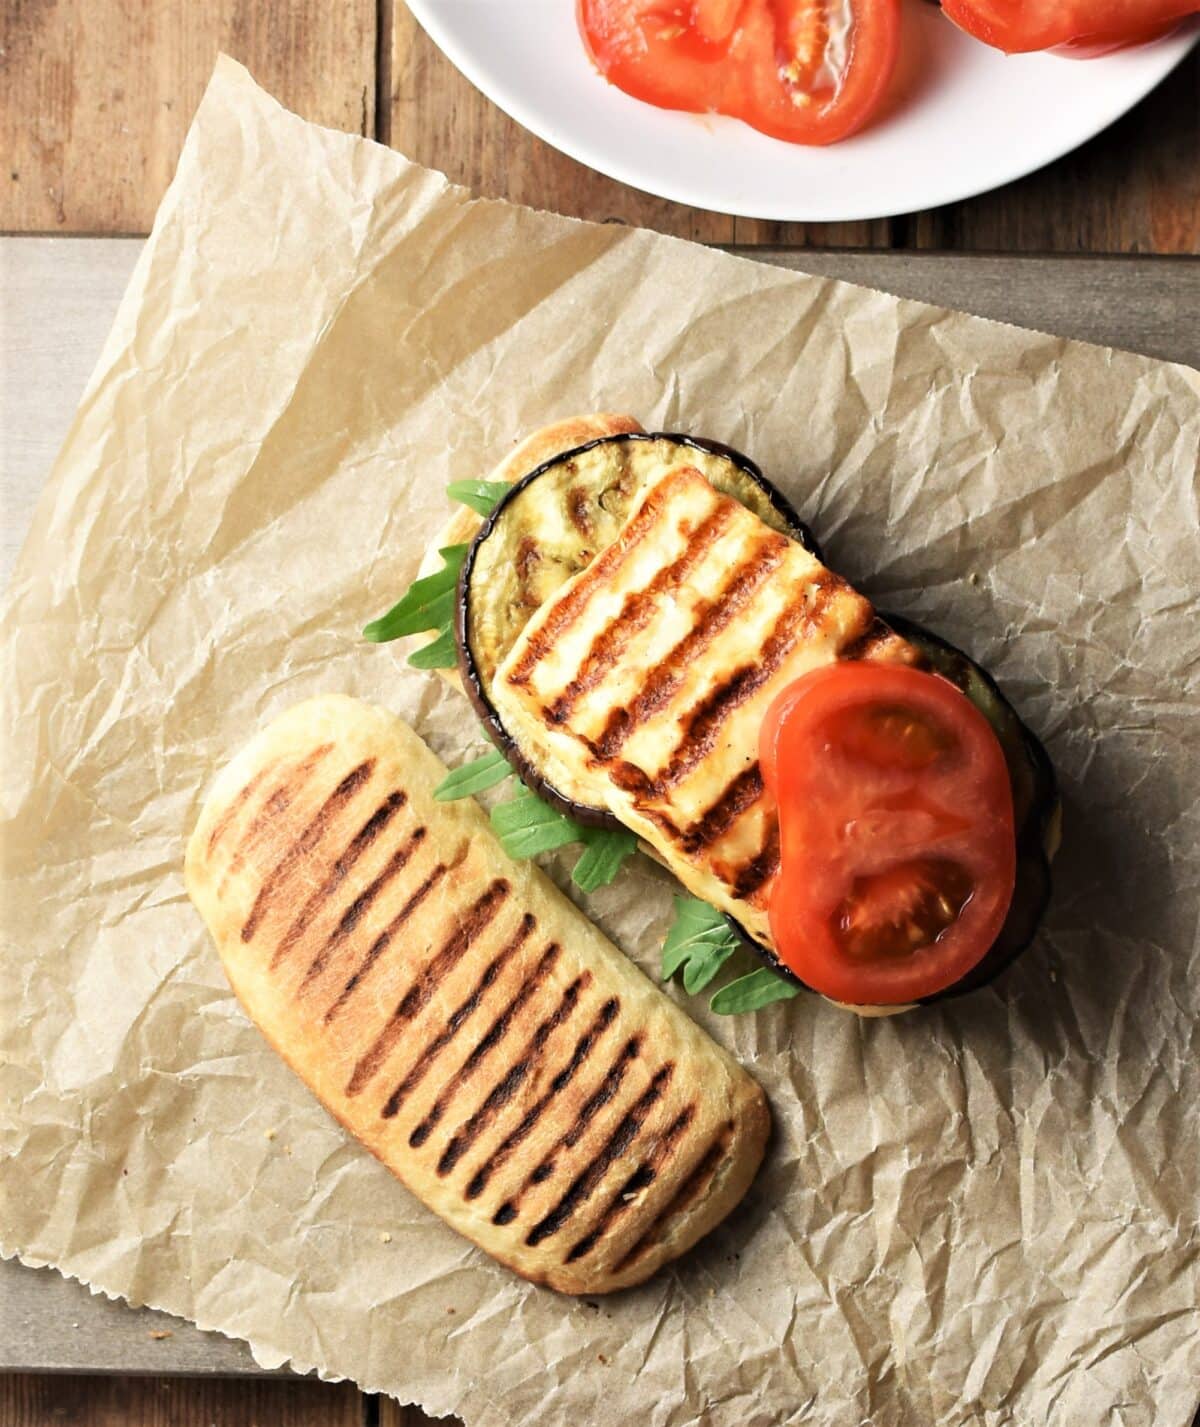 Top down view of open grilled eggplant and halloumi sandwich with tomato on top of paper.